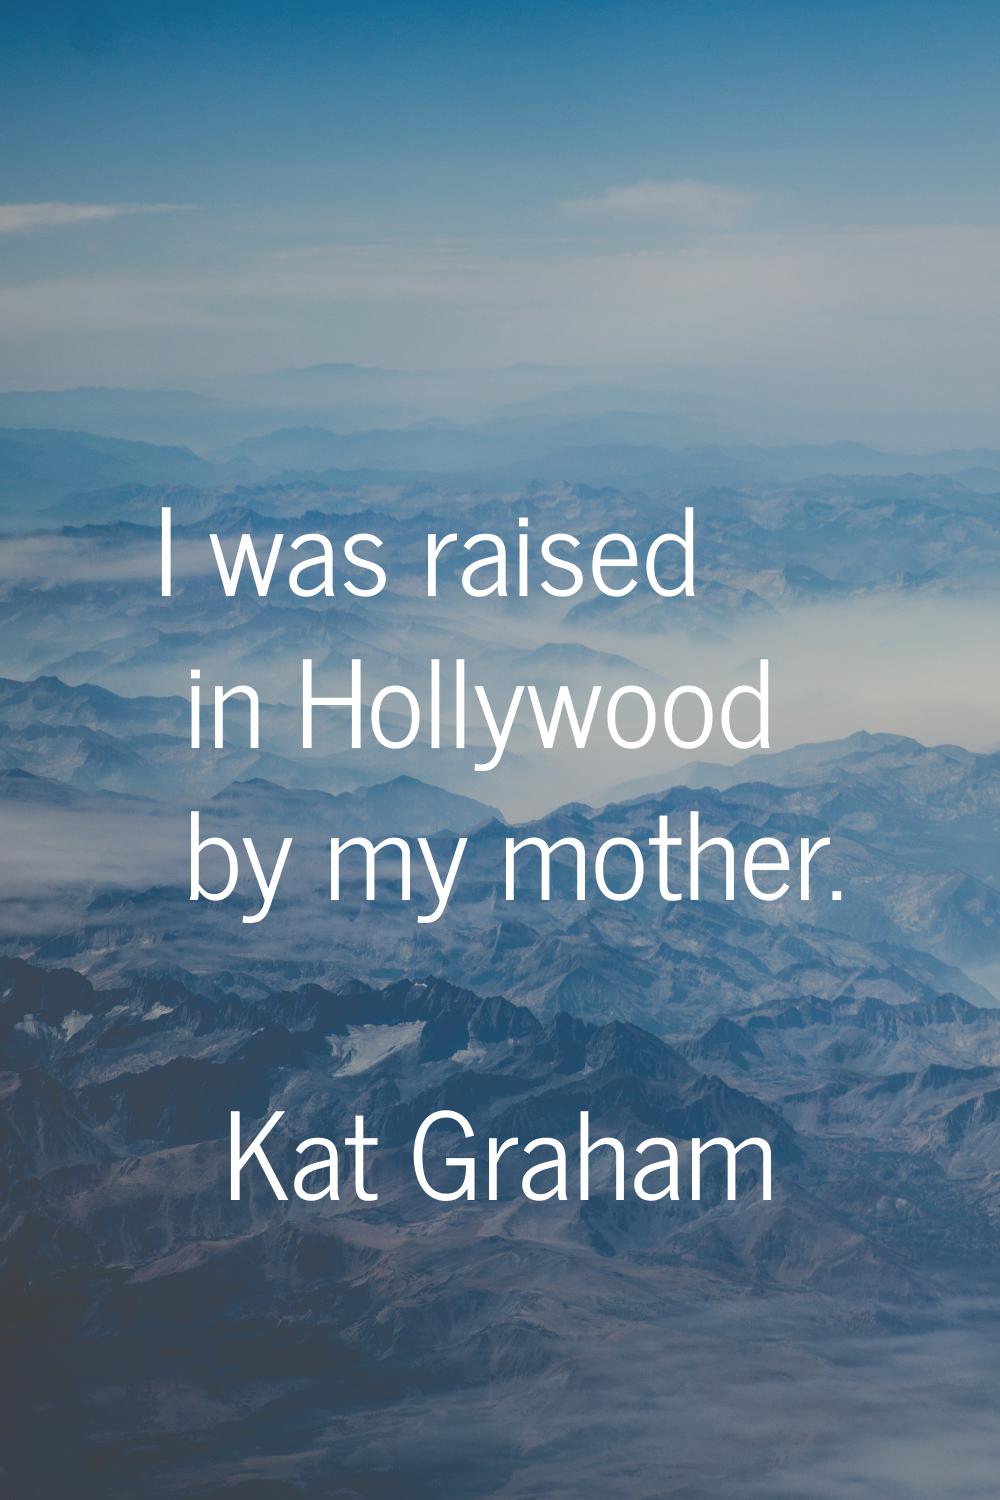 I was raised in Hollywood by my mother.